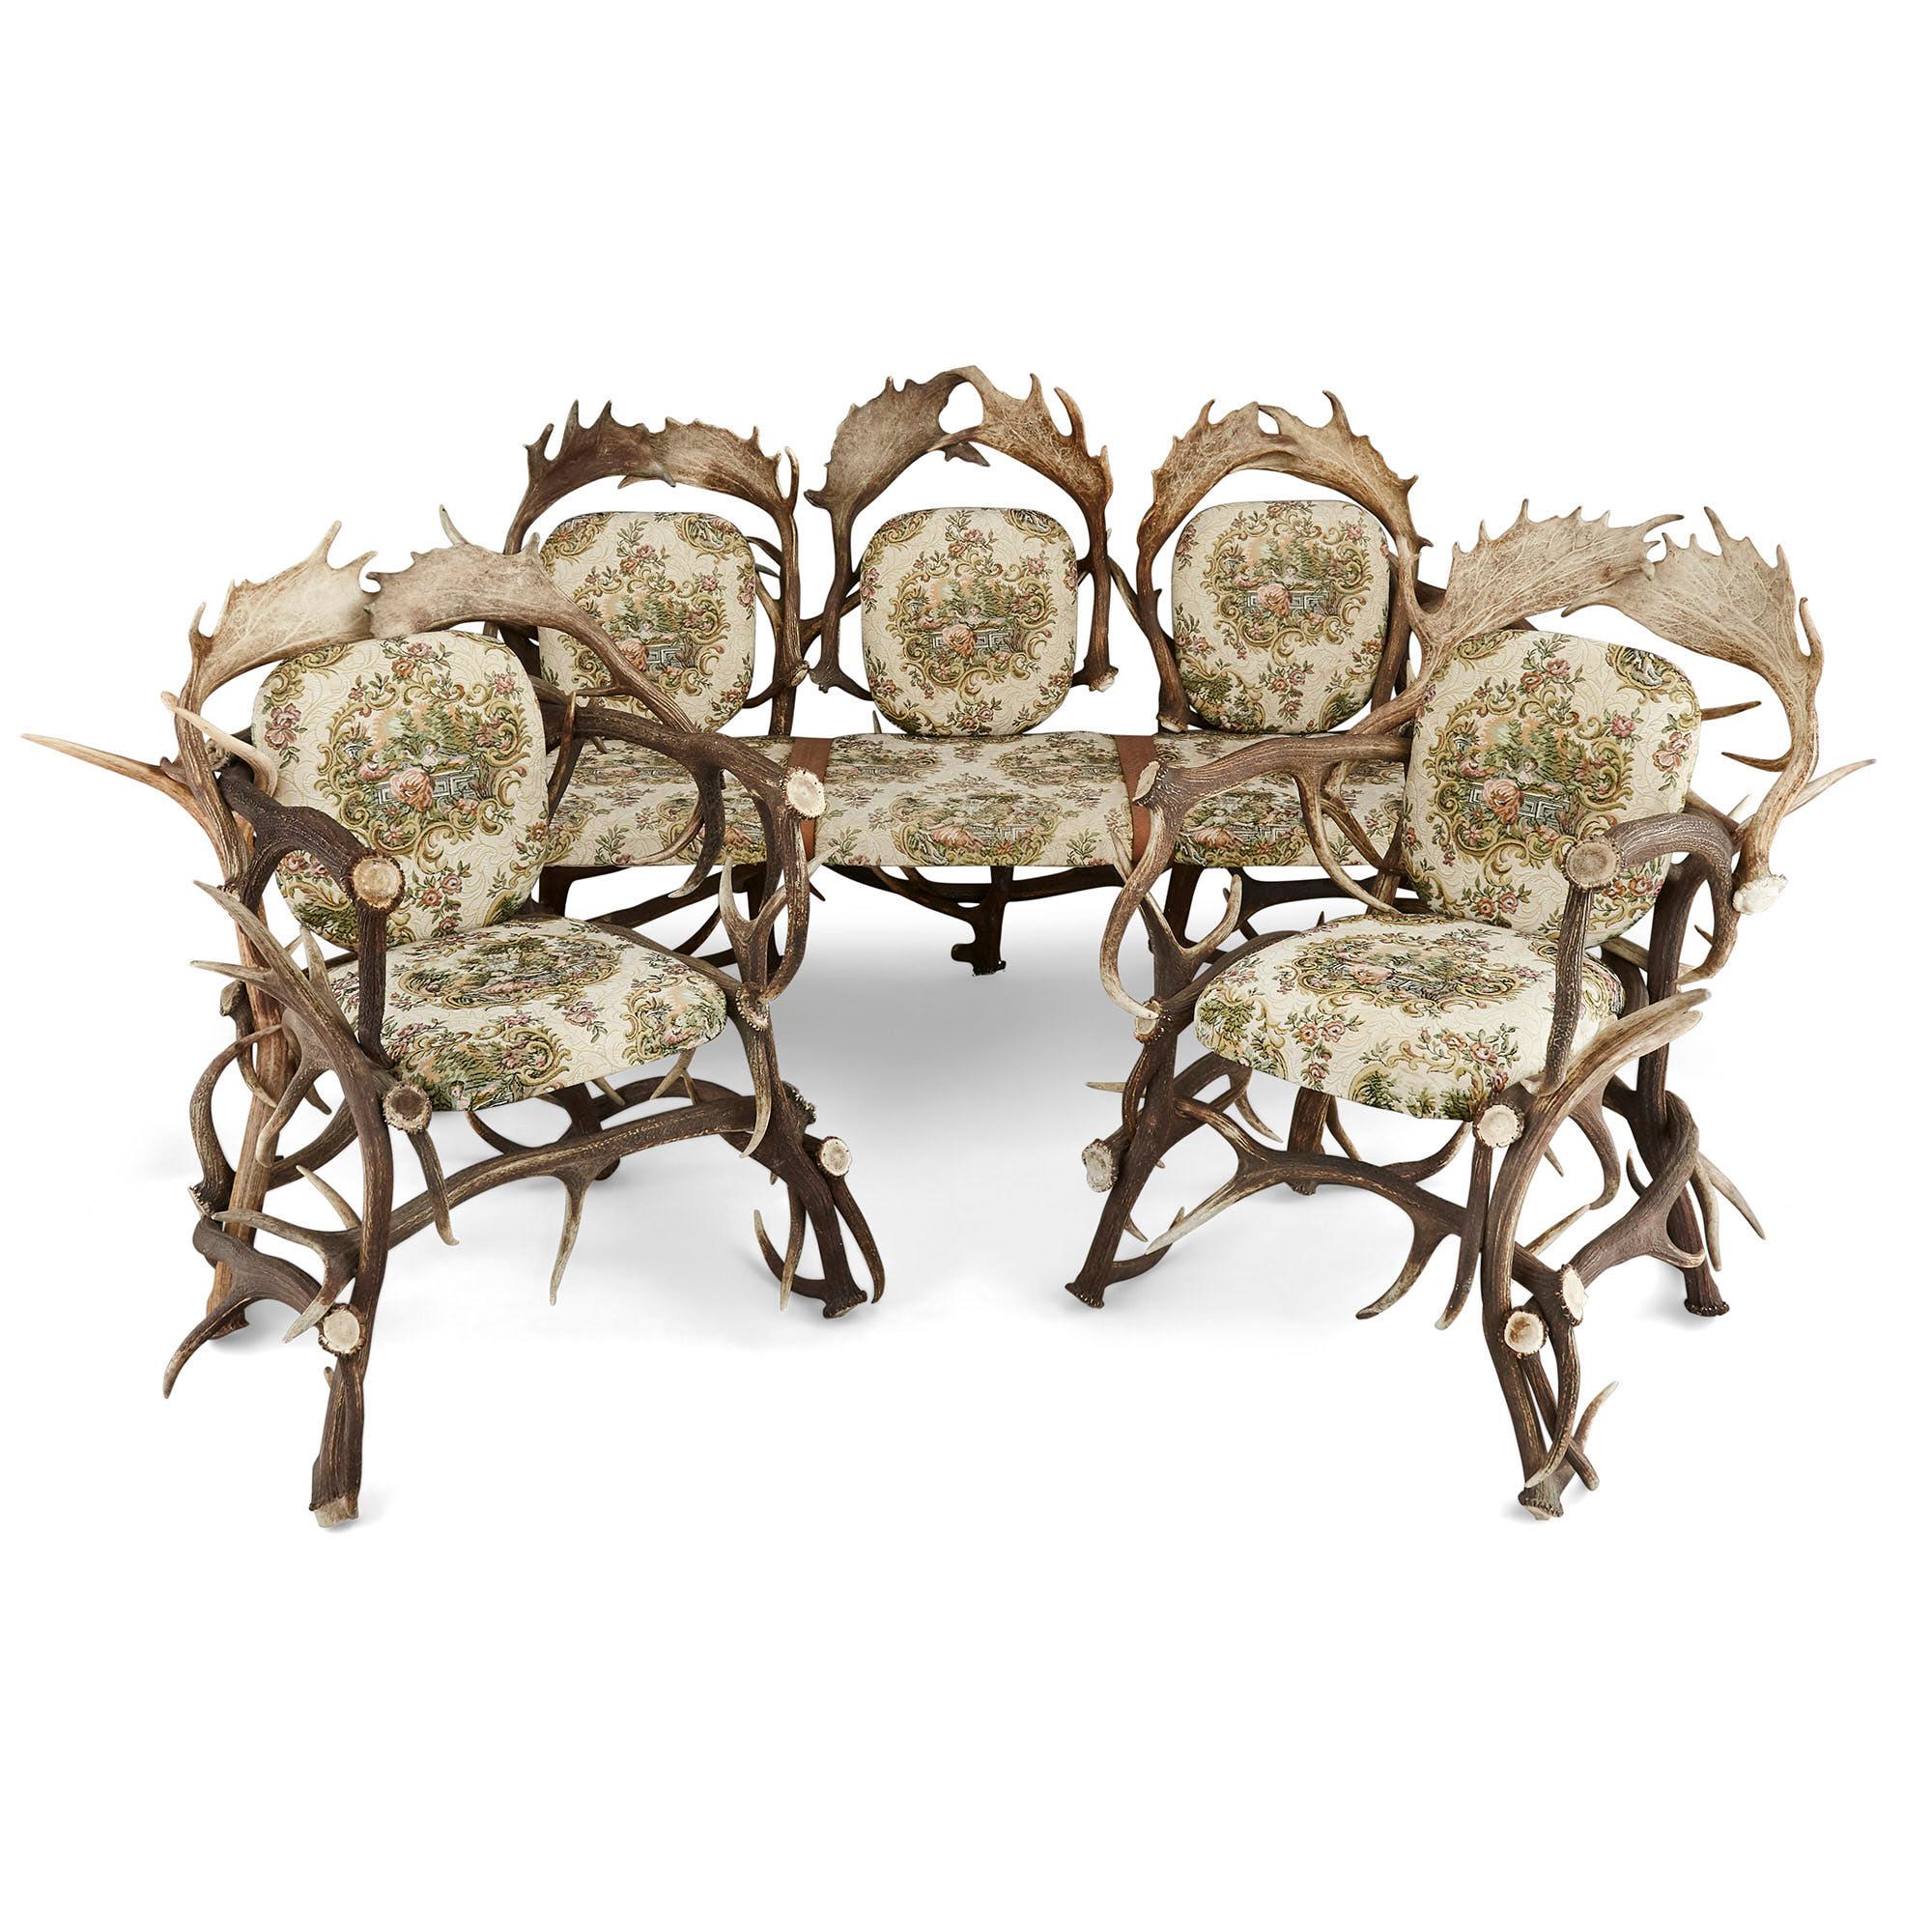 Antique German Antler Settee with Rococo Style Upholstery For Sale 1